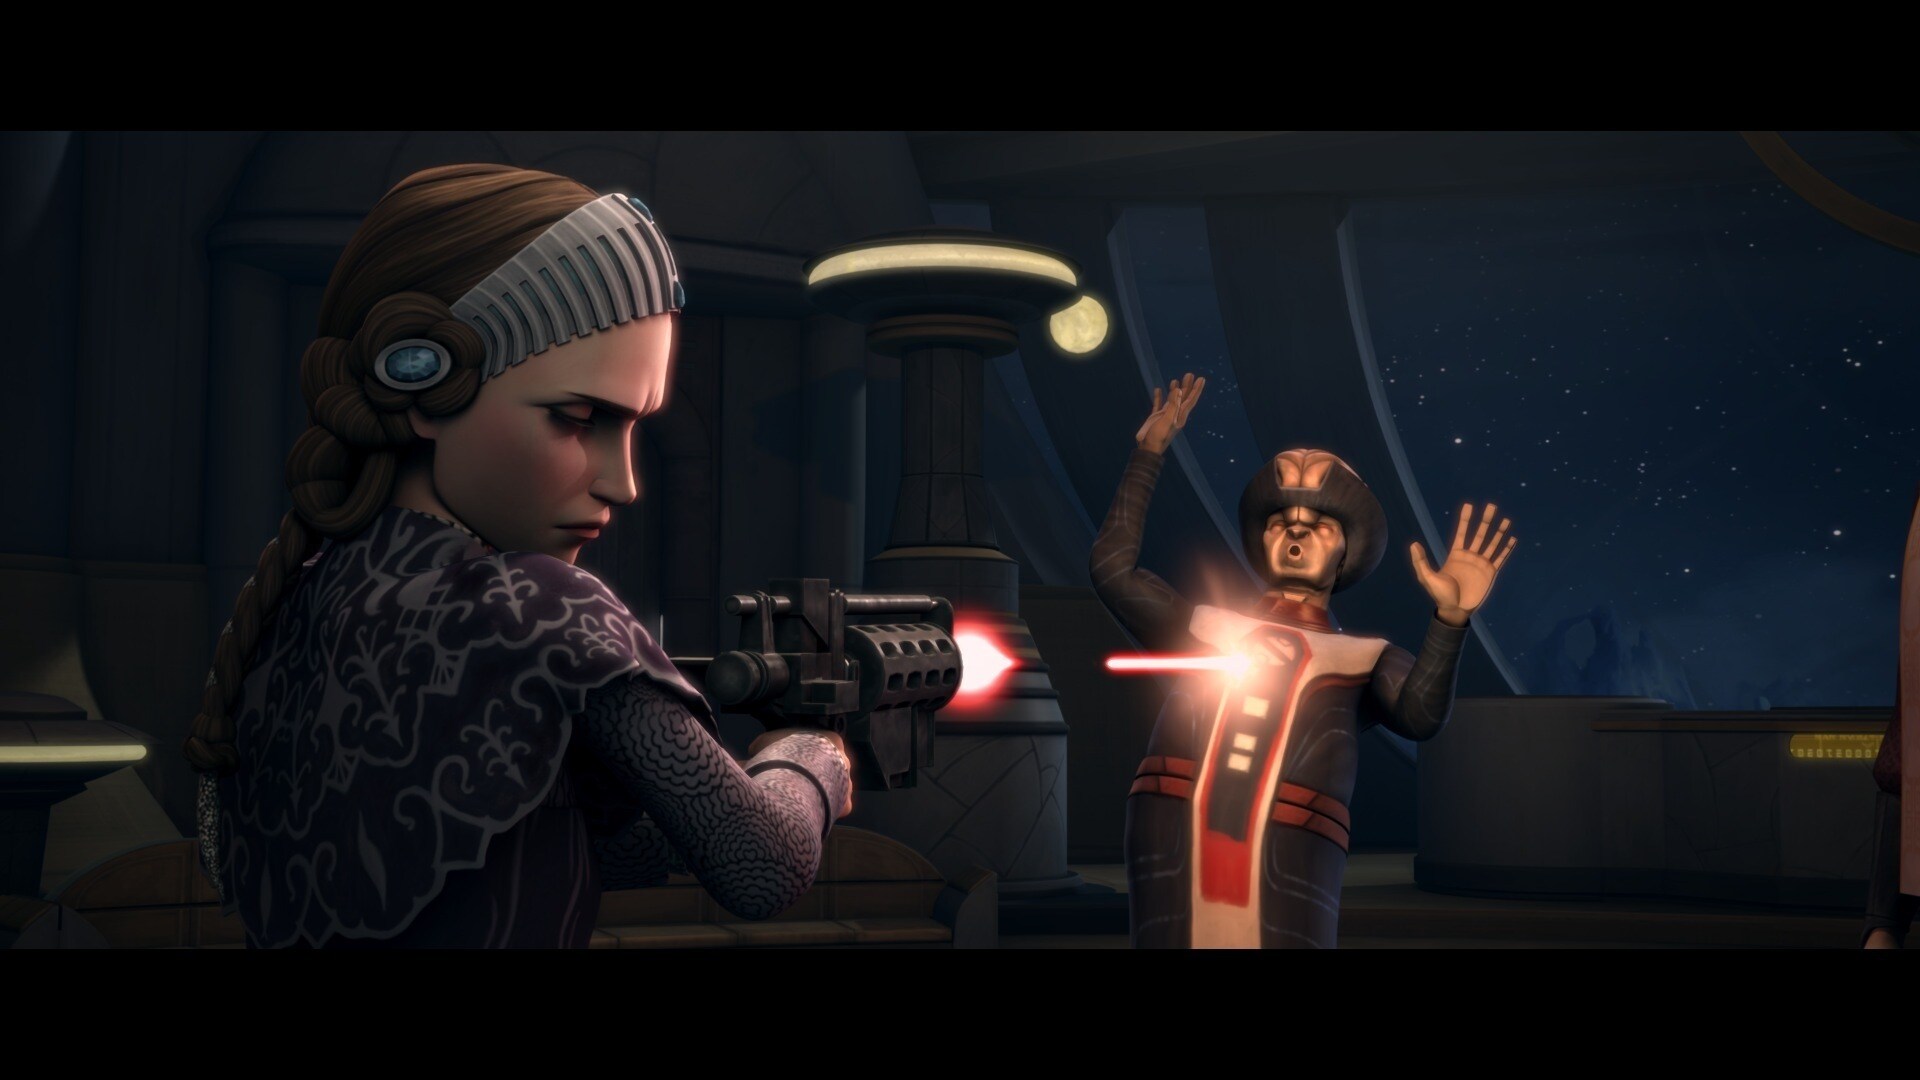 Commando droids drag Padmé before Rush Clovis in his office, where Senator Lawise already stands....